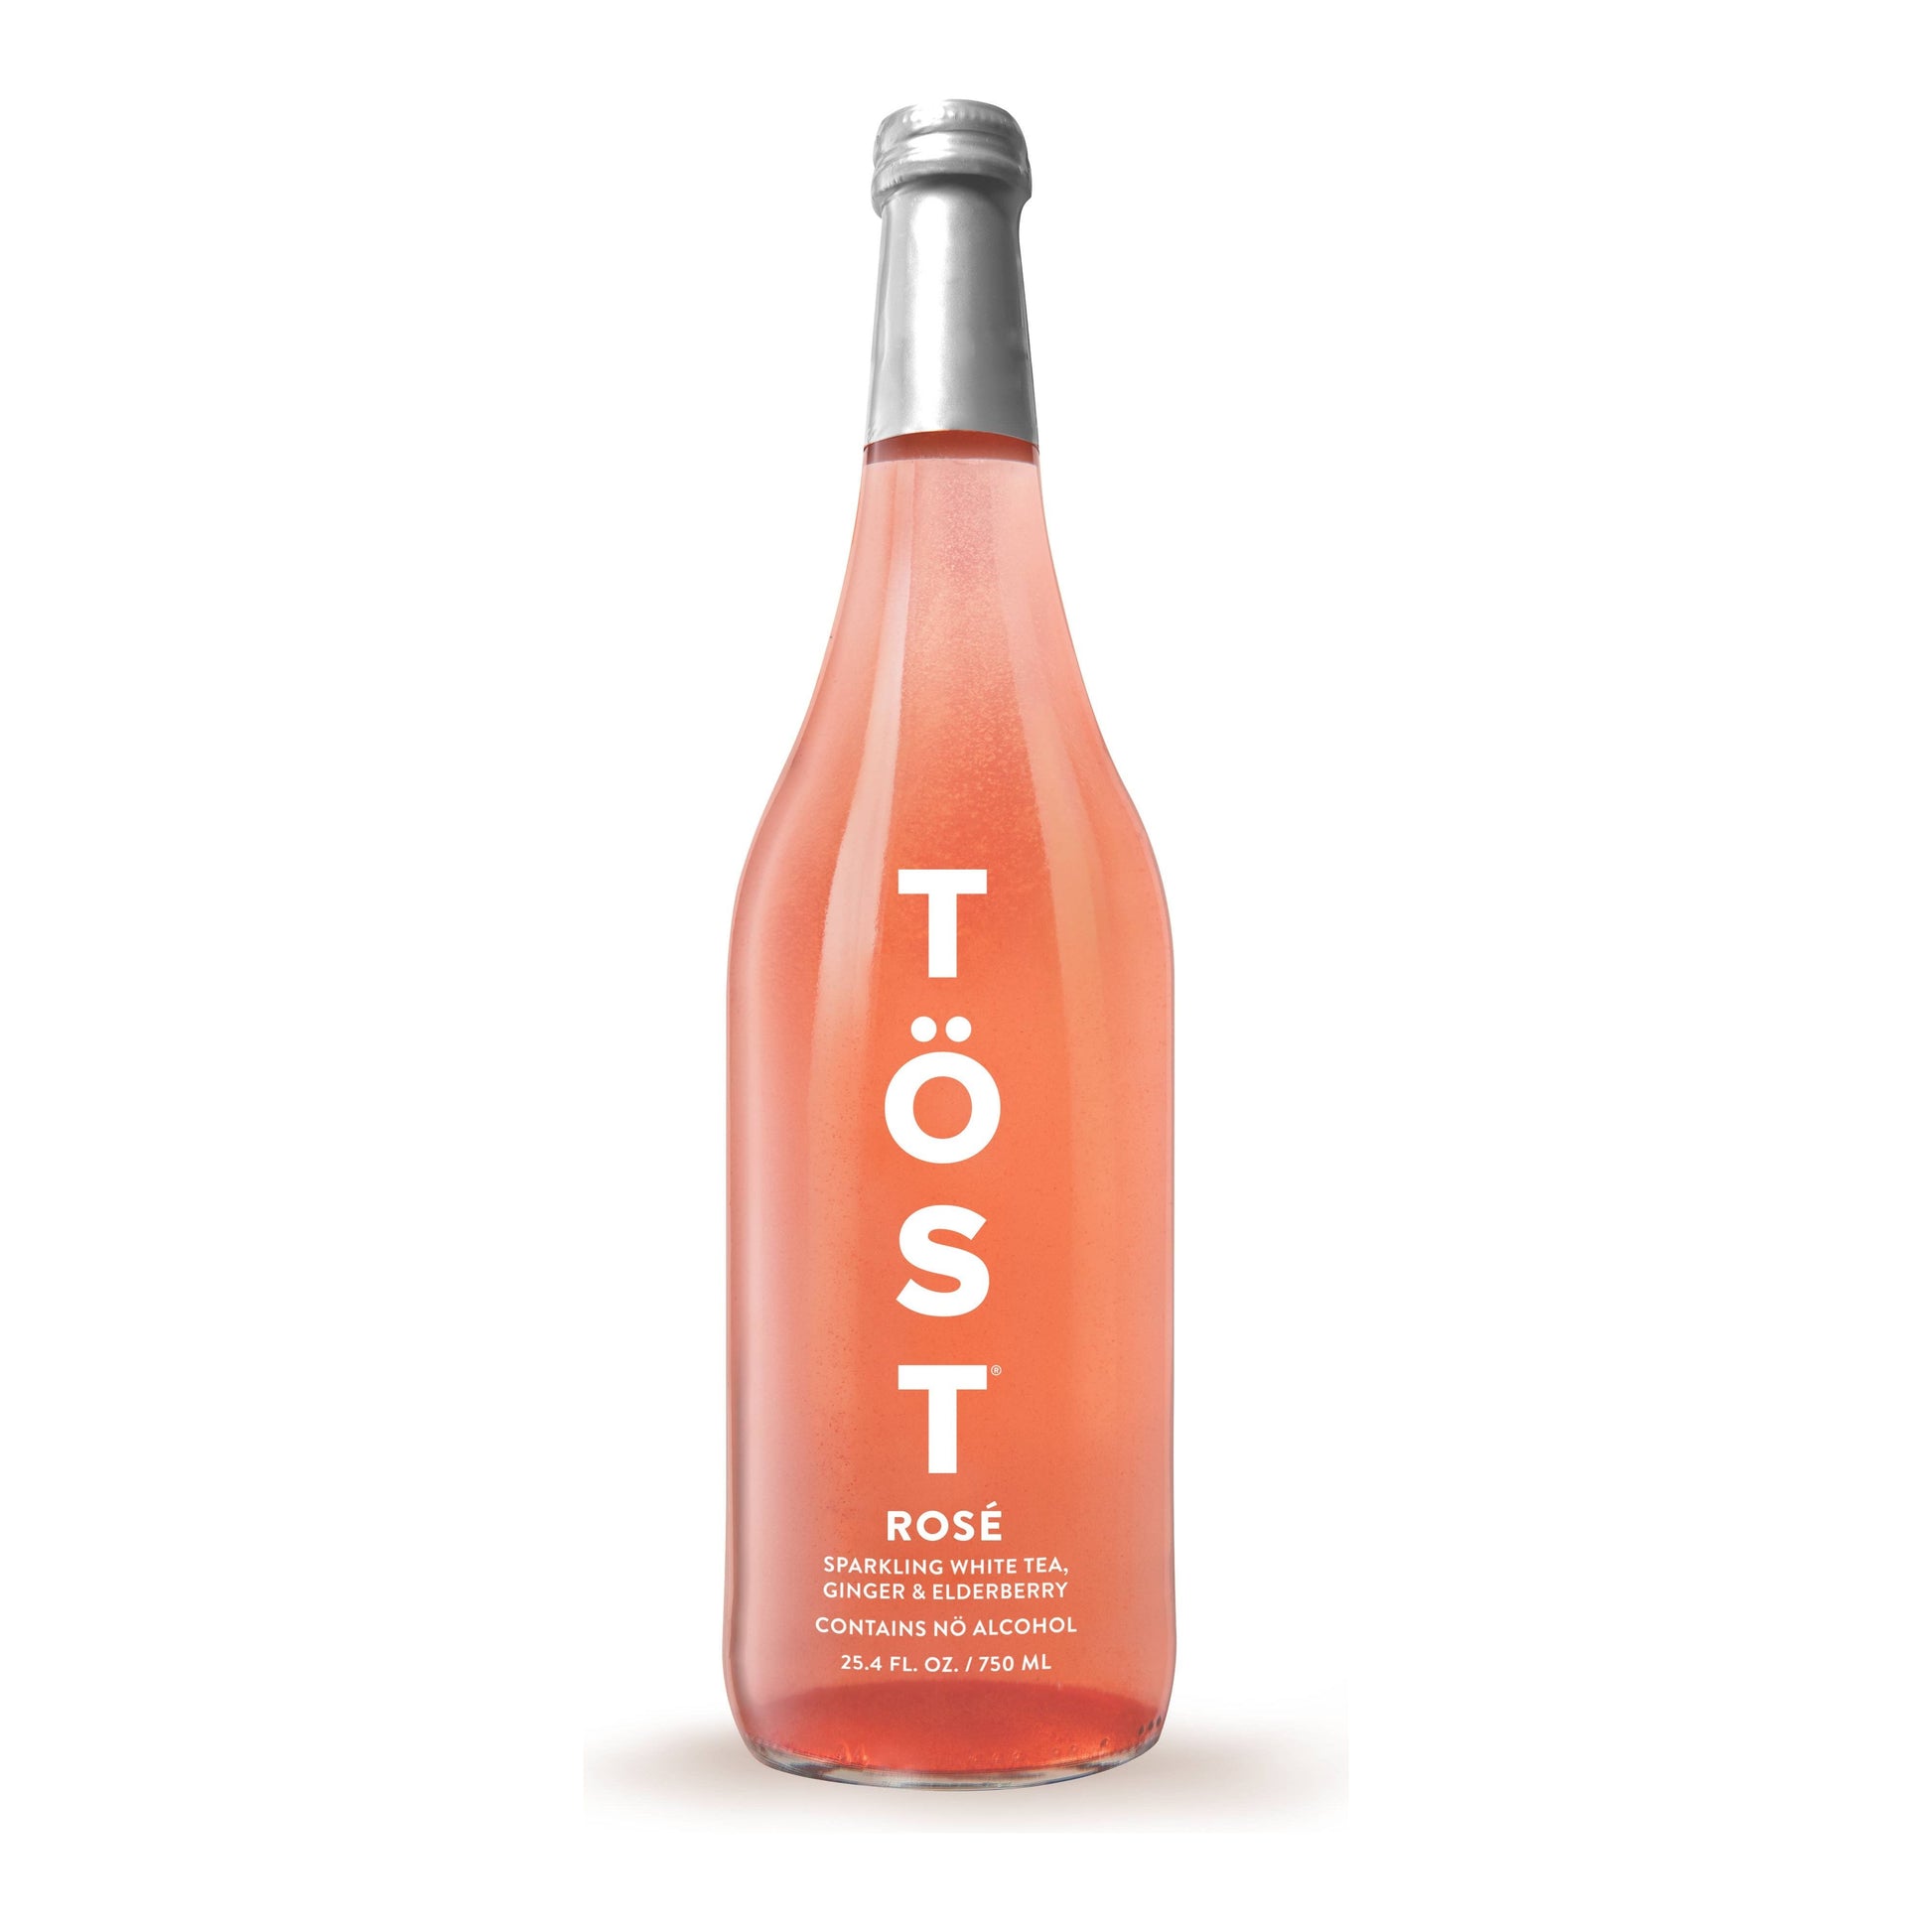 A bottle of TÖST ROSÉ, a non-alcoholic refresher by TÖST Beverages, stands against a white background. The bottle is tinted pink with simple white text labeling.